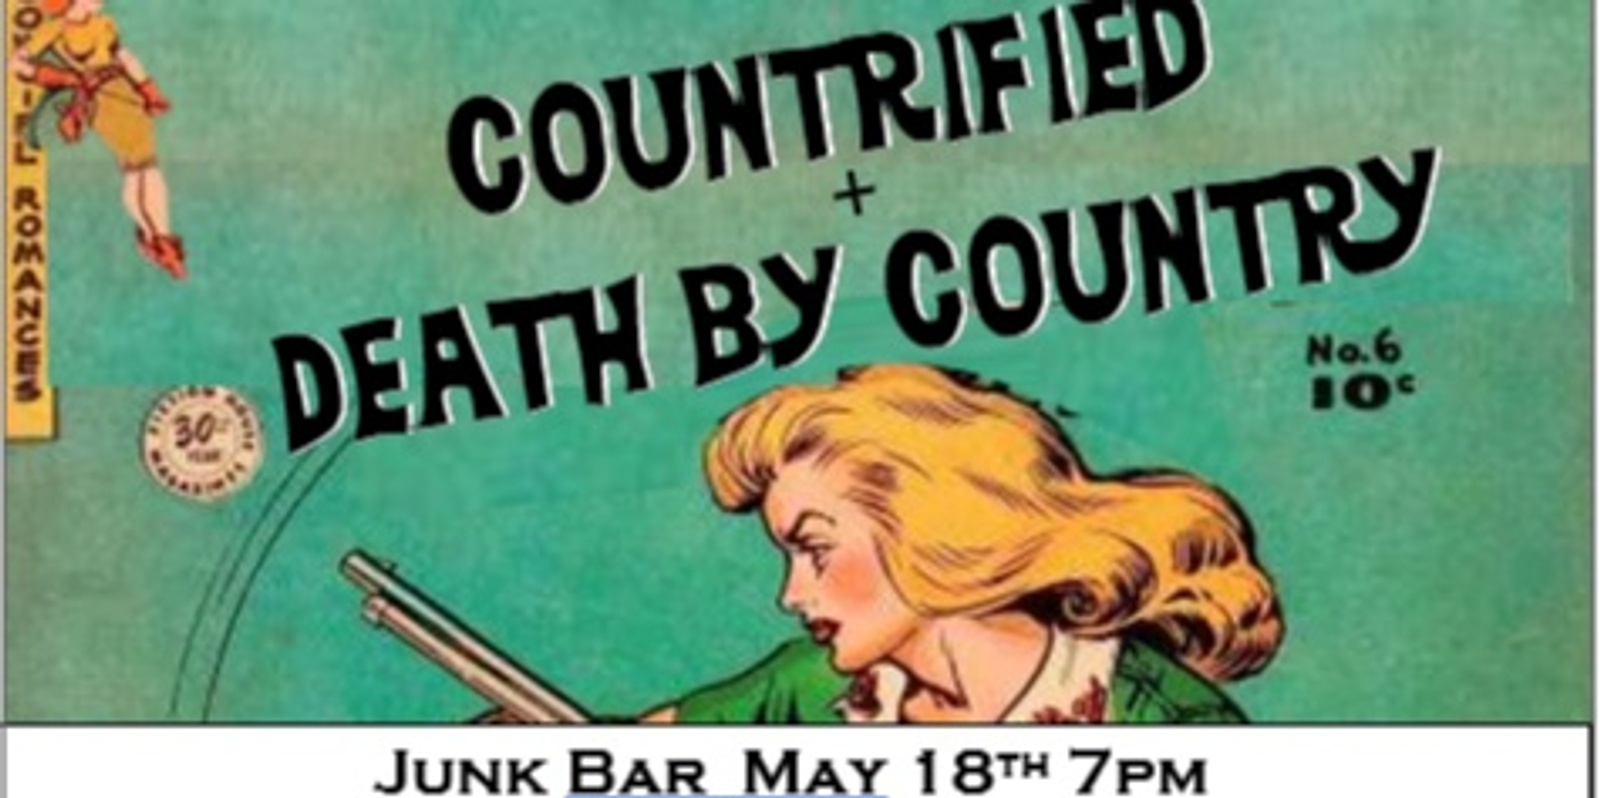 Banner image for Countrified and Death by Country @ The Junk Bar